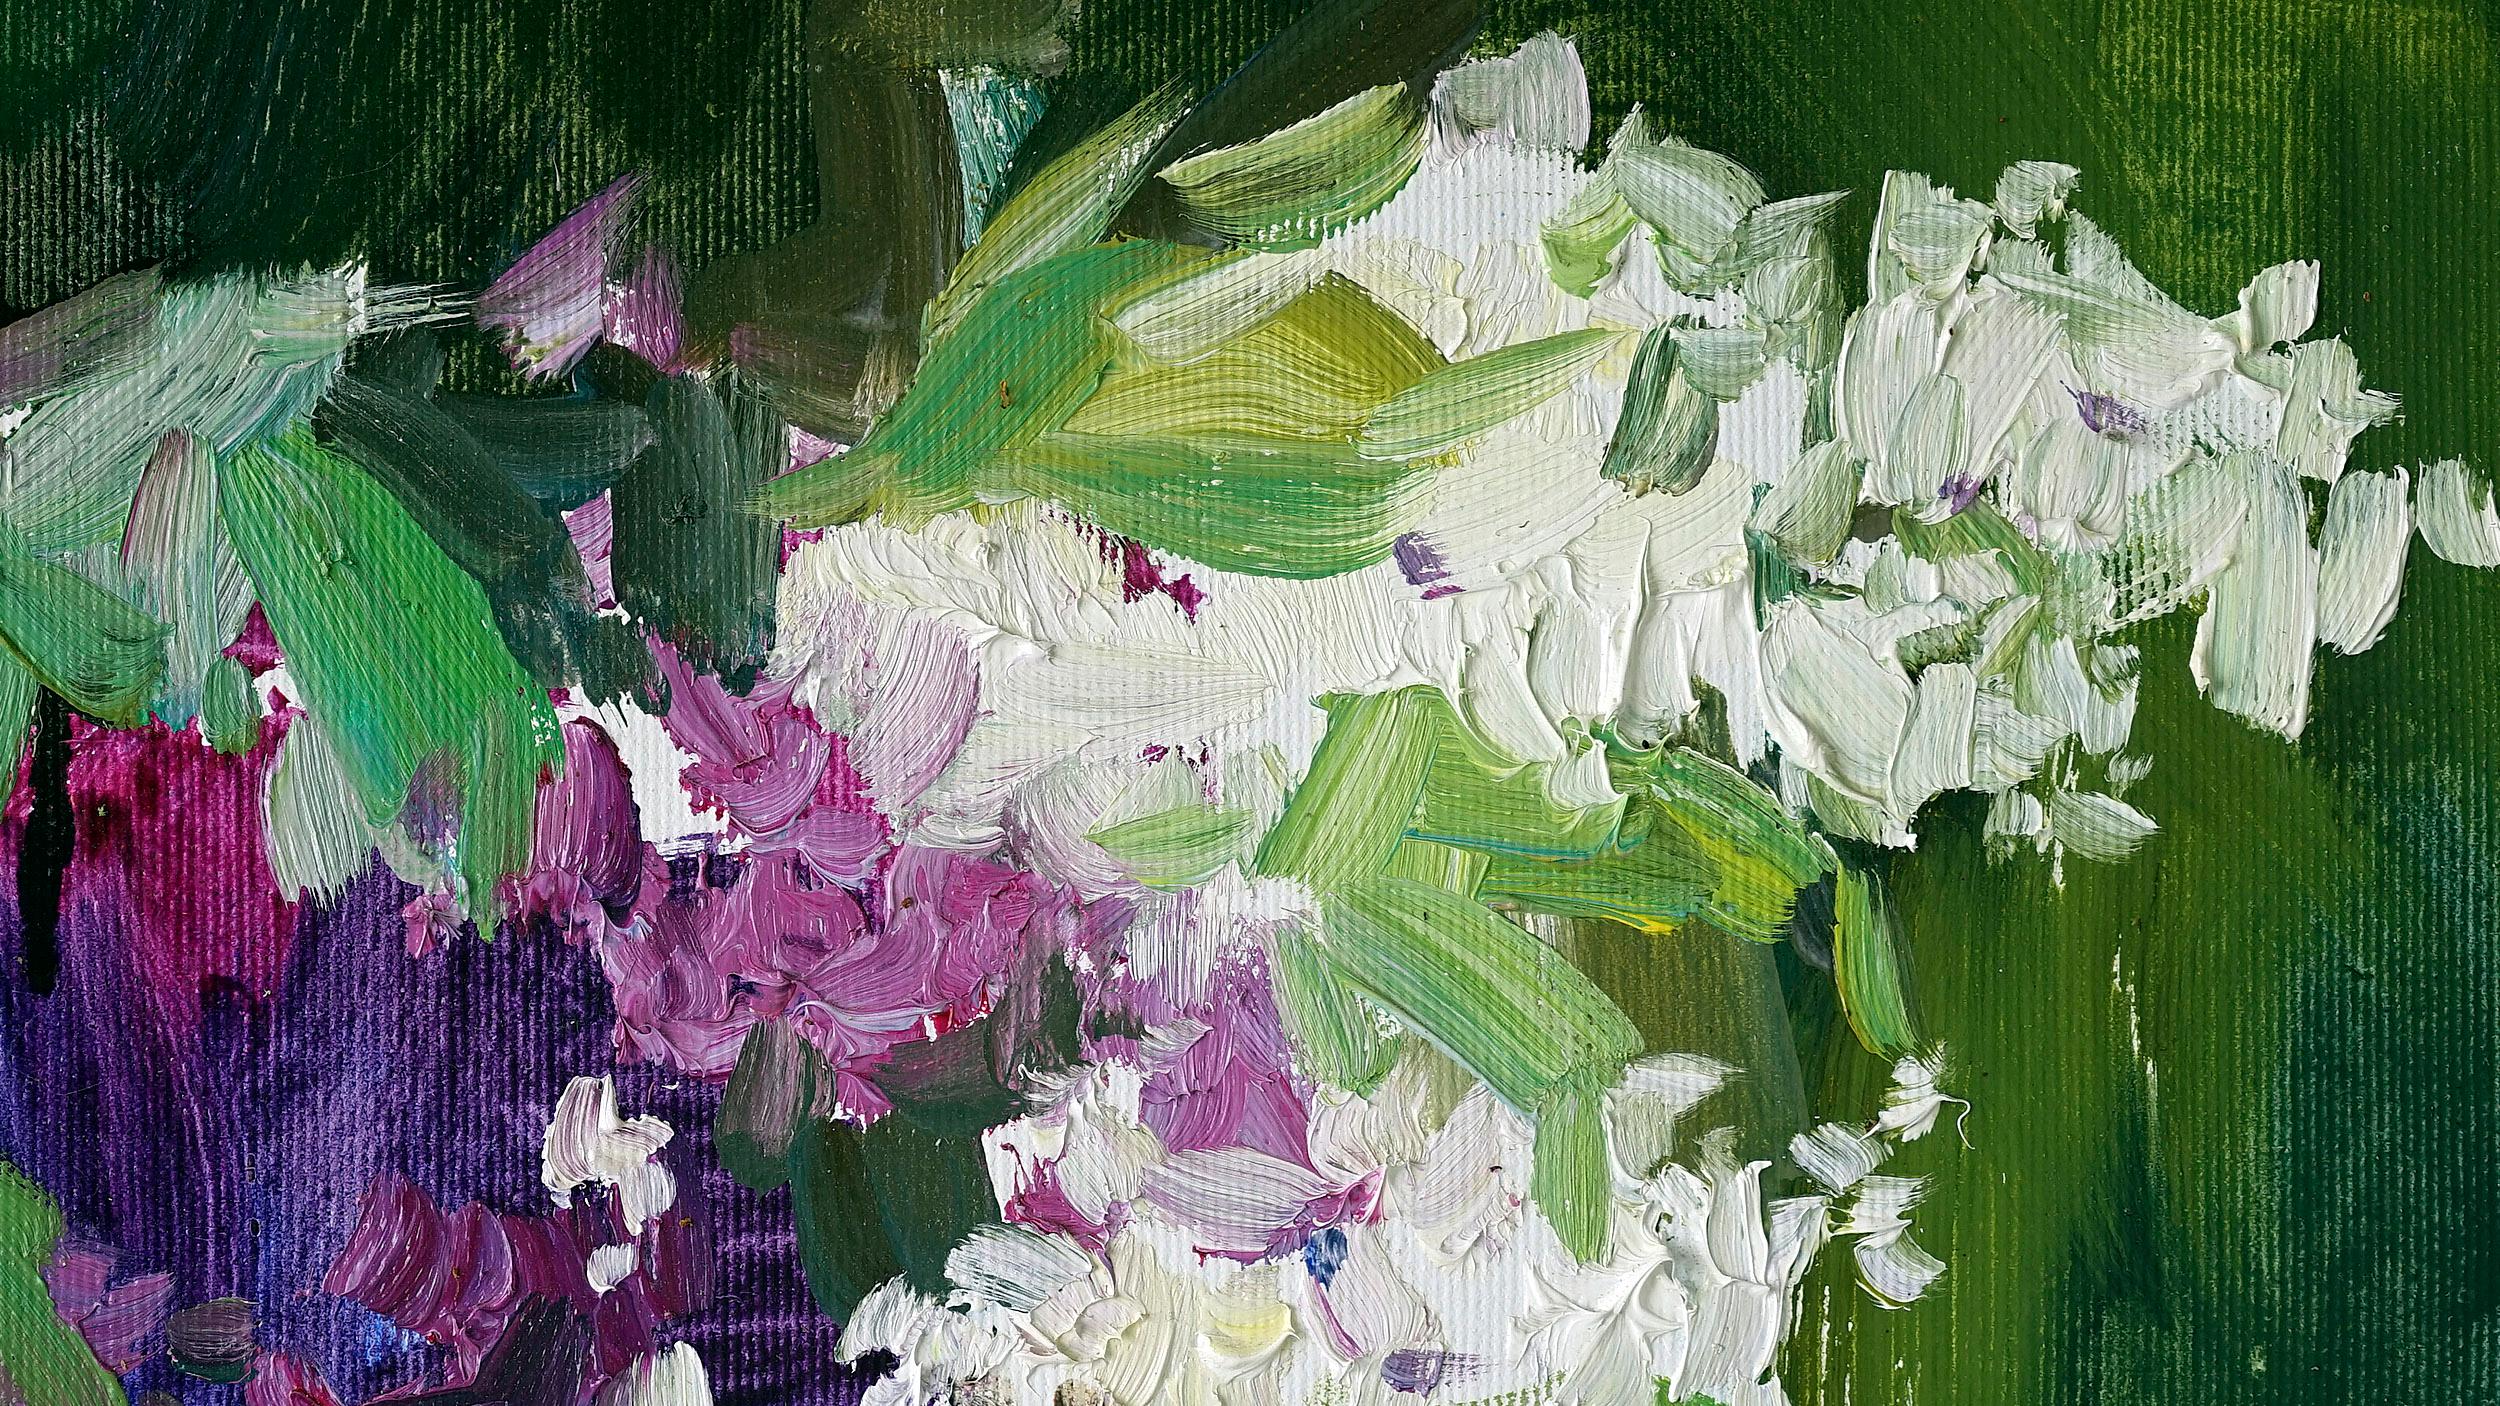 Lilac and Lilies of the Valley Still-Life Oil Painting Purple Pink White Green  - Black Still-Life Painting by Nataliya Tretyakova